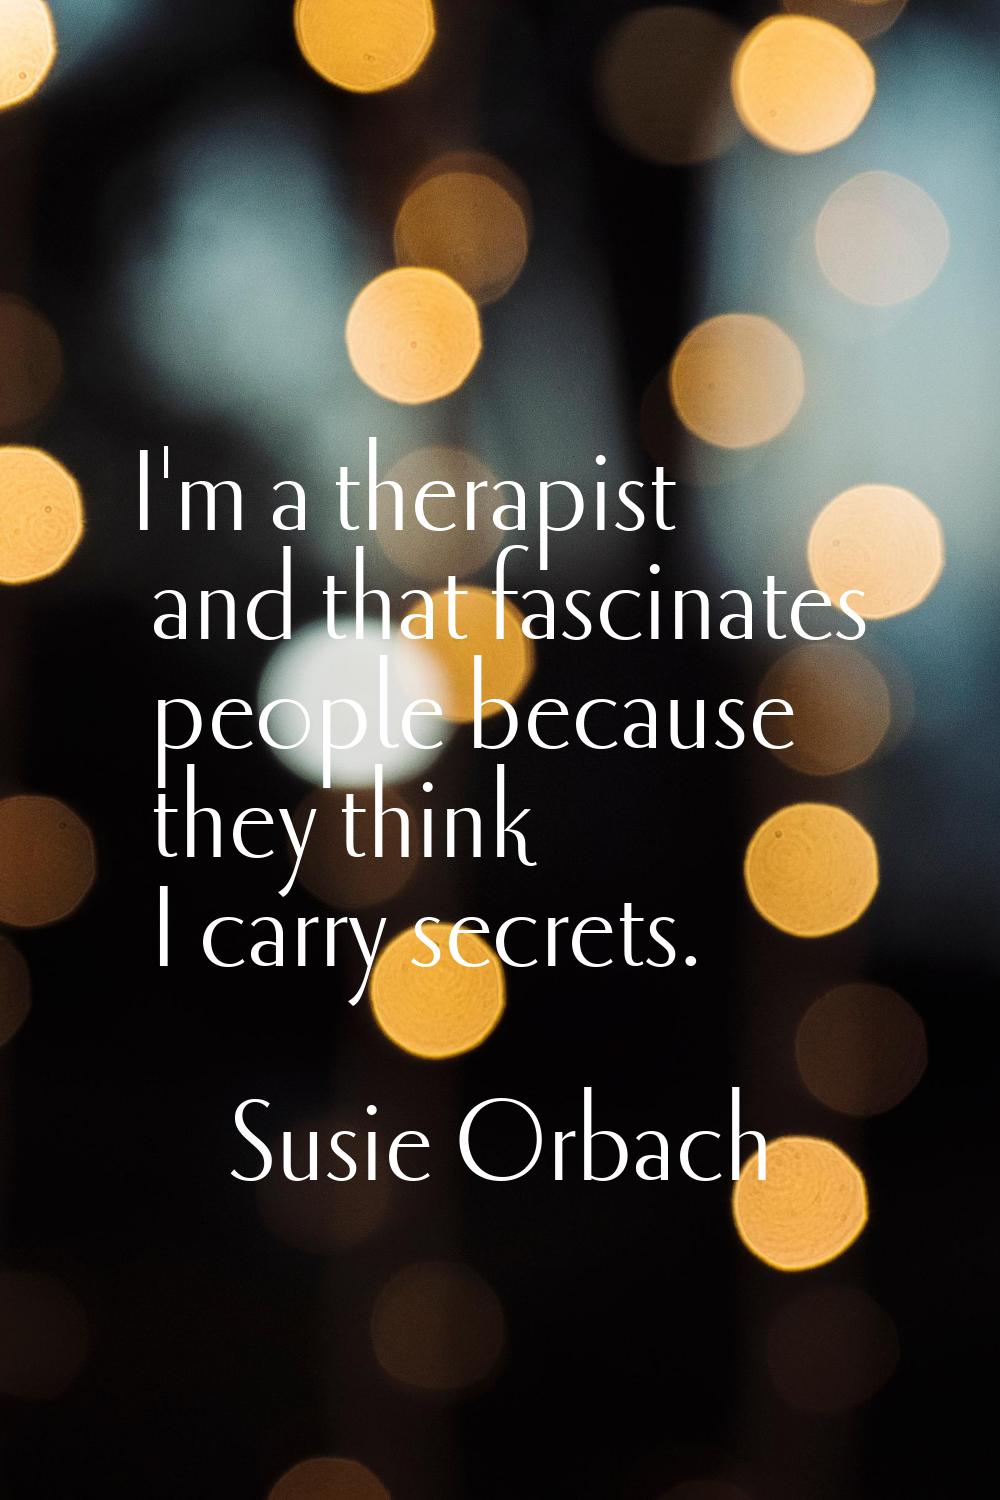 I'm a therapist and that fascinates people because they think I carry secrets.